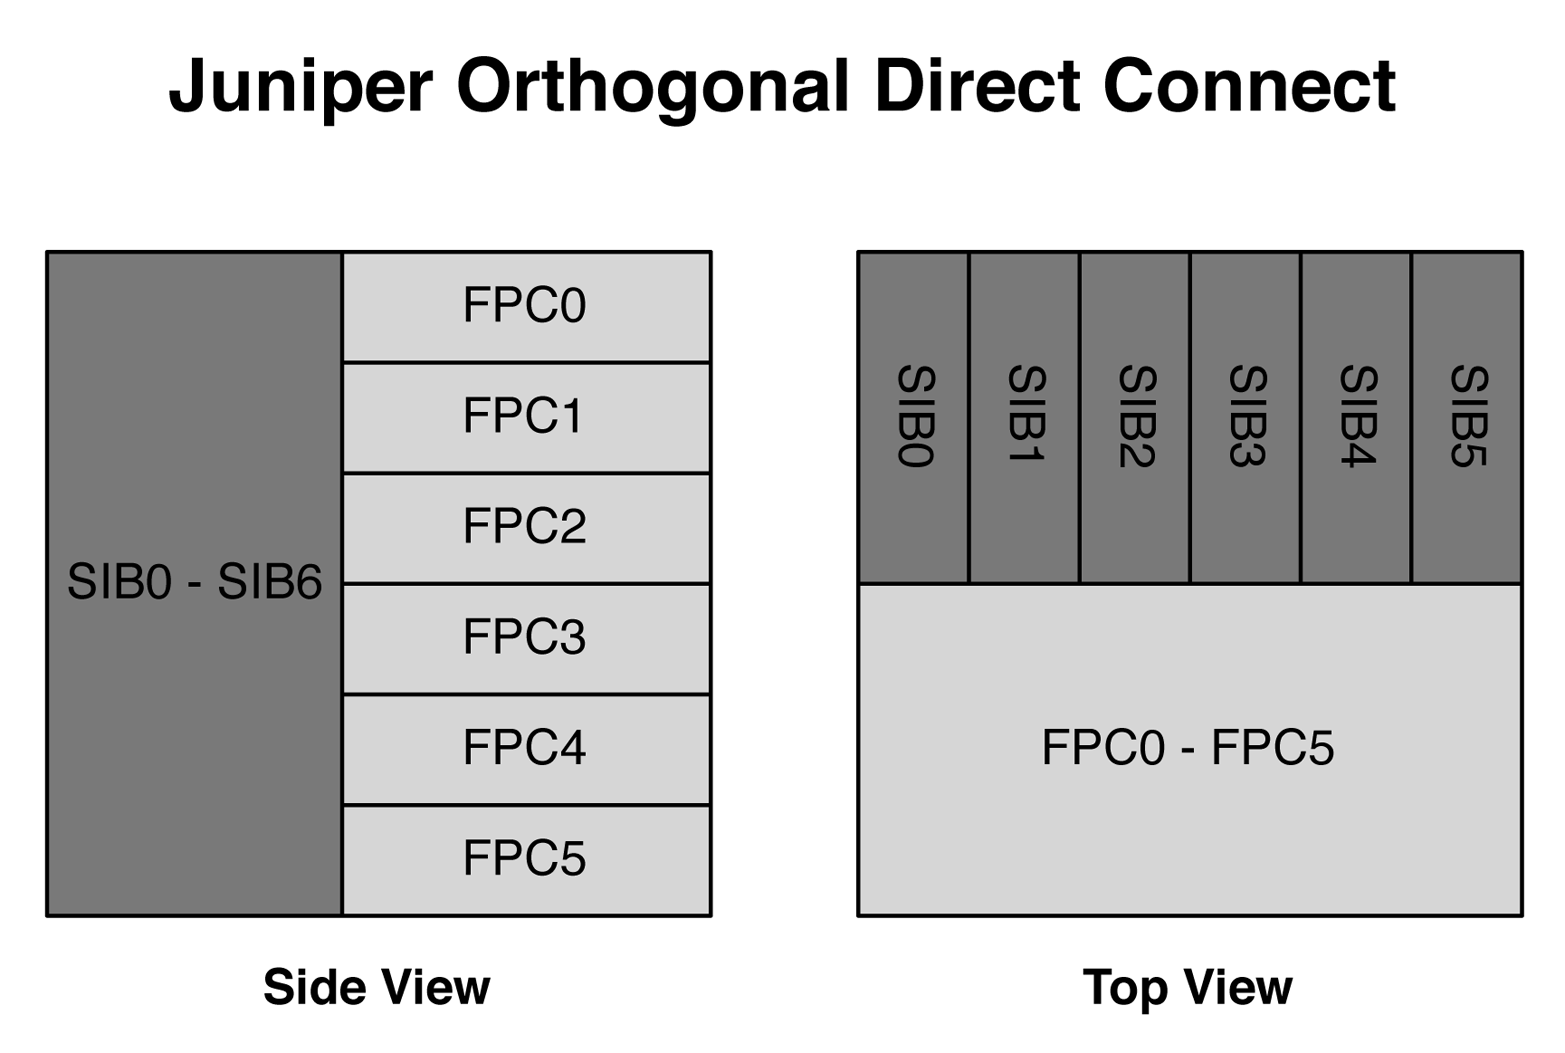 Side and top views of Juniper orthogonal direct connect architecture